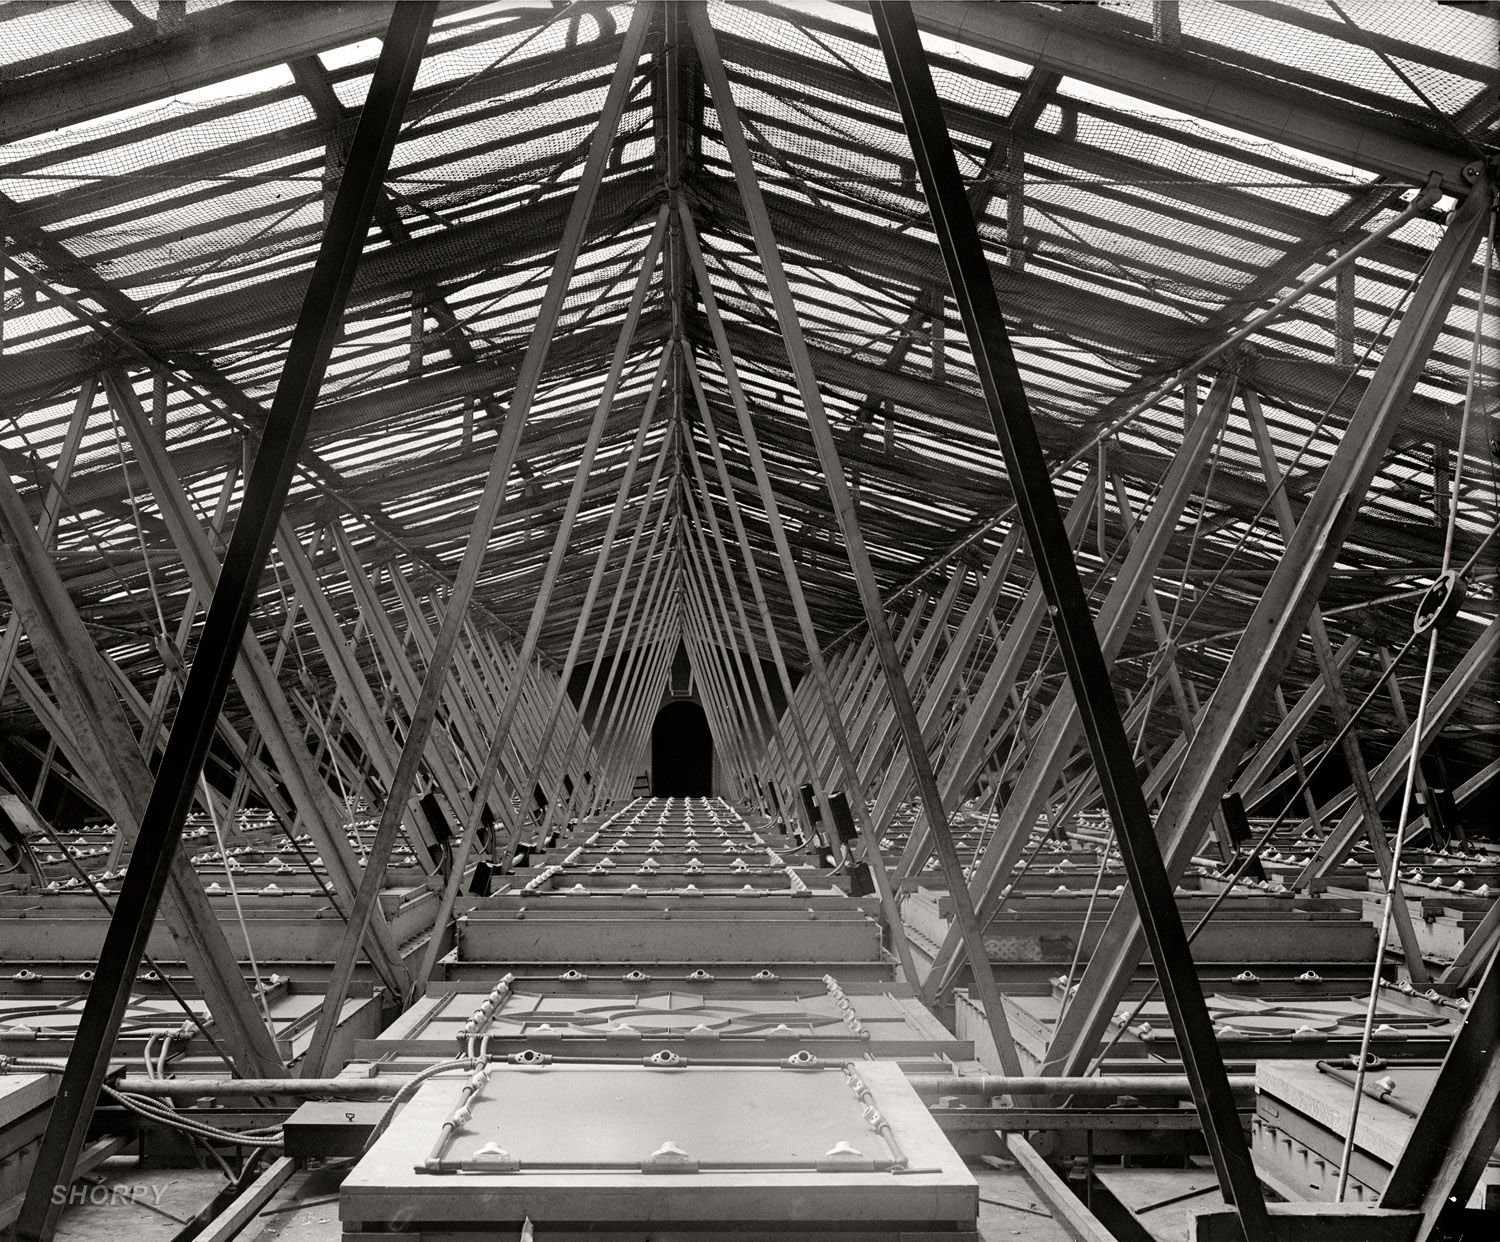 In political reportage there's a lot written about the House floor, but what about the ceiling? From 1925, a topside view of the House of Representatives in the U.S. Capitol. National Photo Company Collection glass negative. View full size.